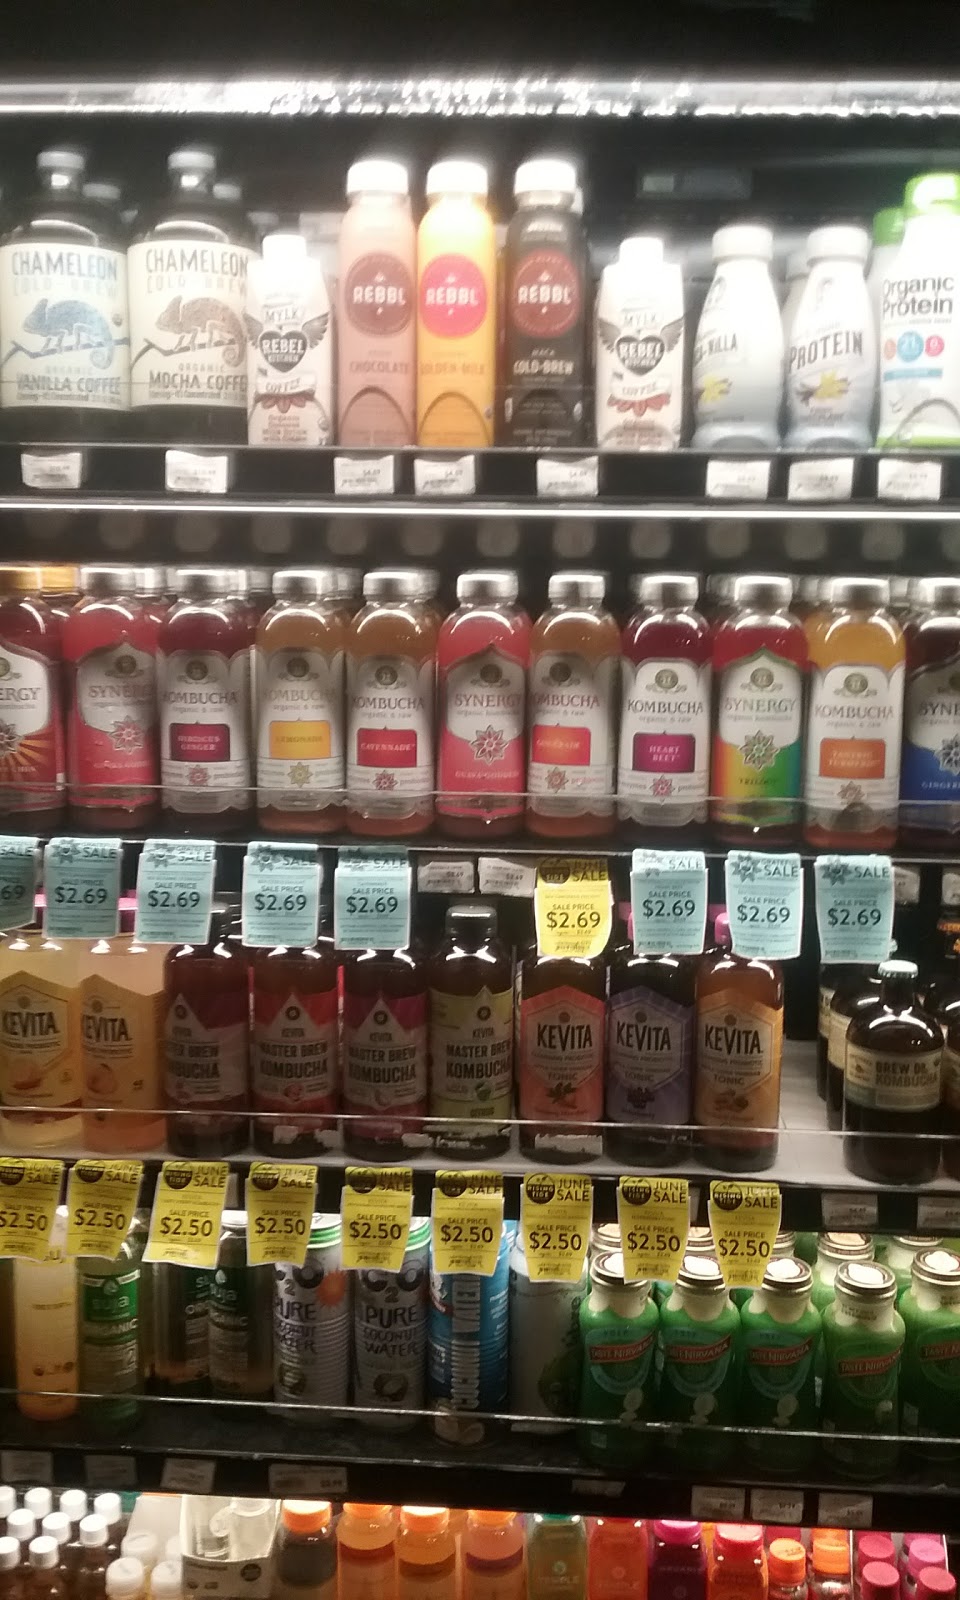 Rising Tide Natural Market | 42 Forest Ave, Glen Cove, NY 11542, USA | Phone: (516) 676-7895